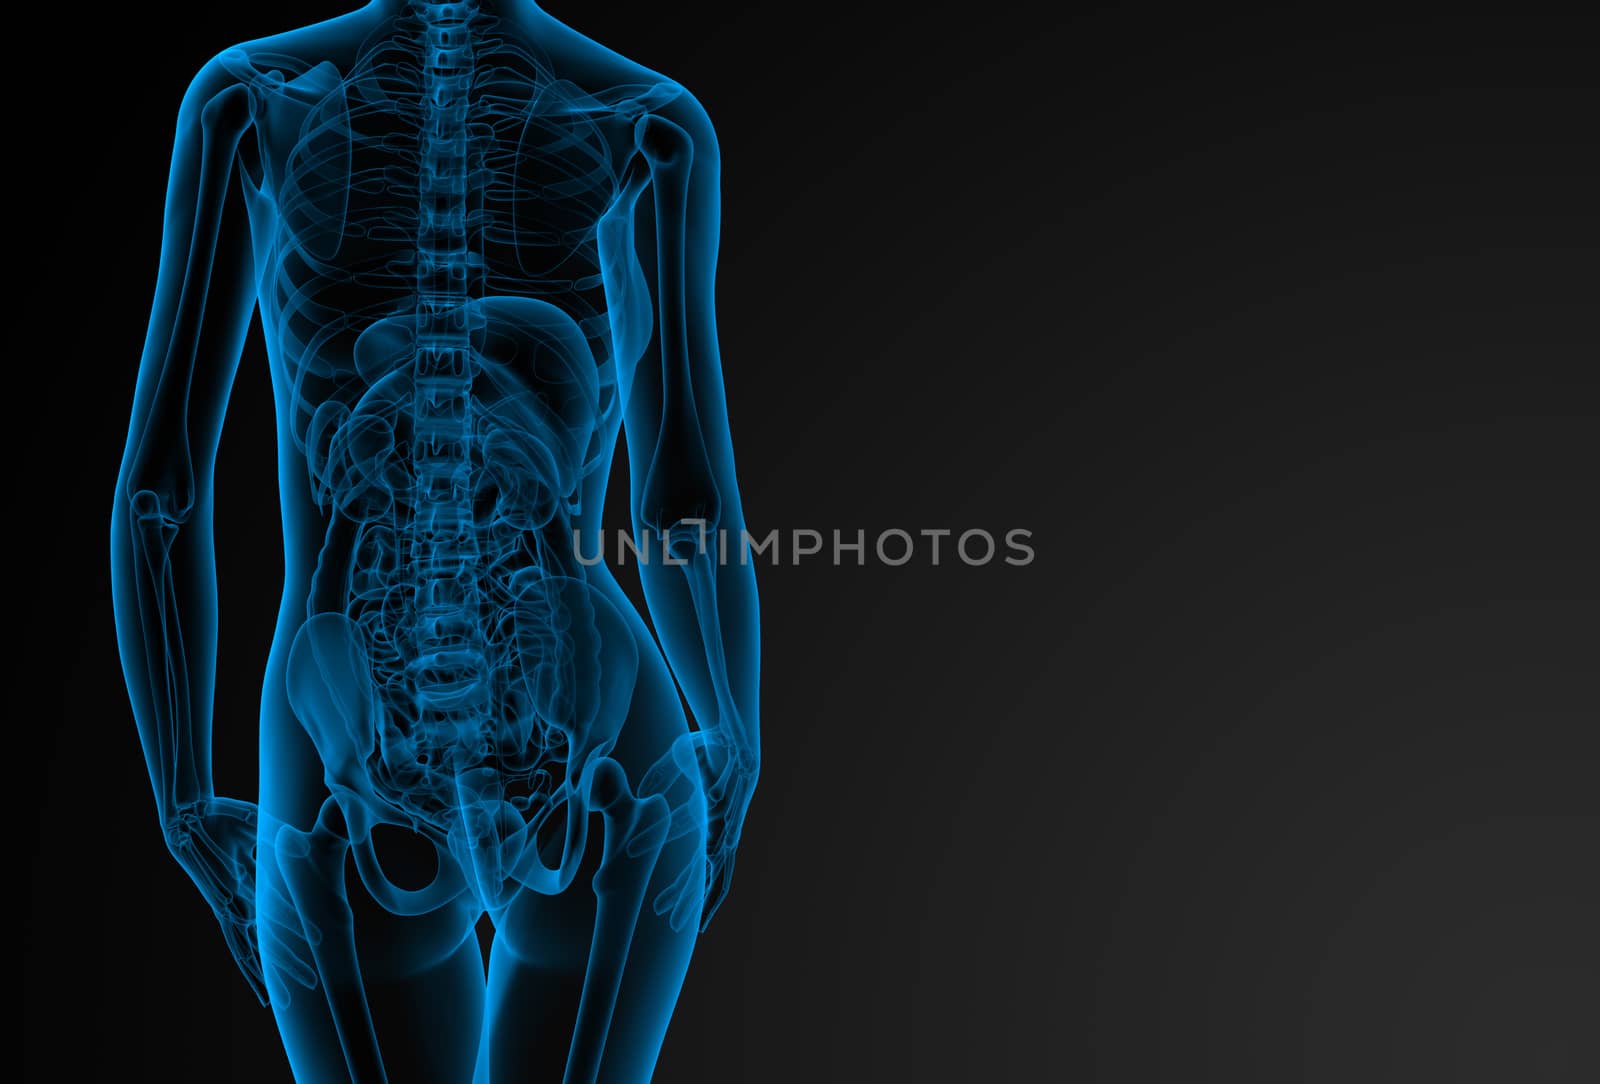 3d rendered illustration of the female anatomy - back view